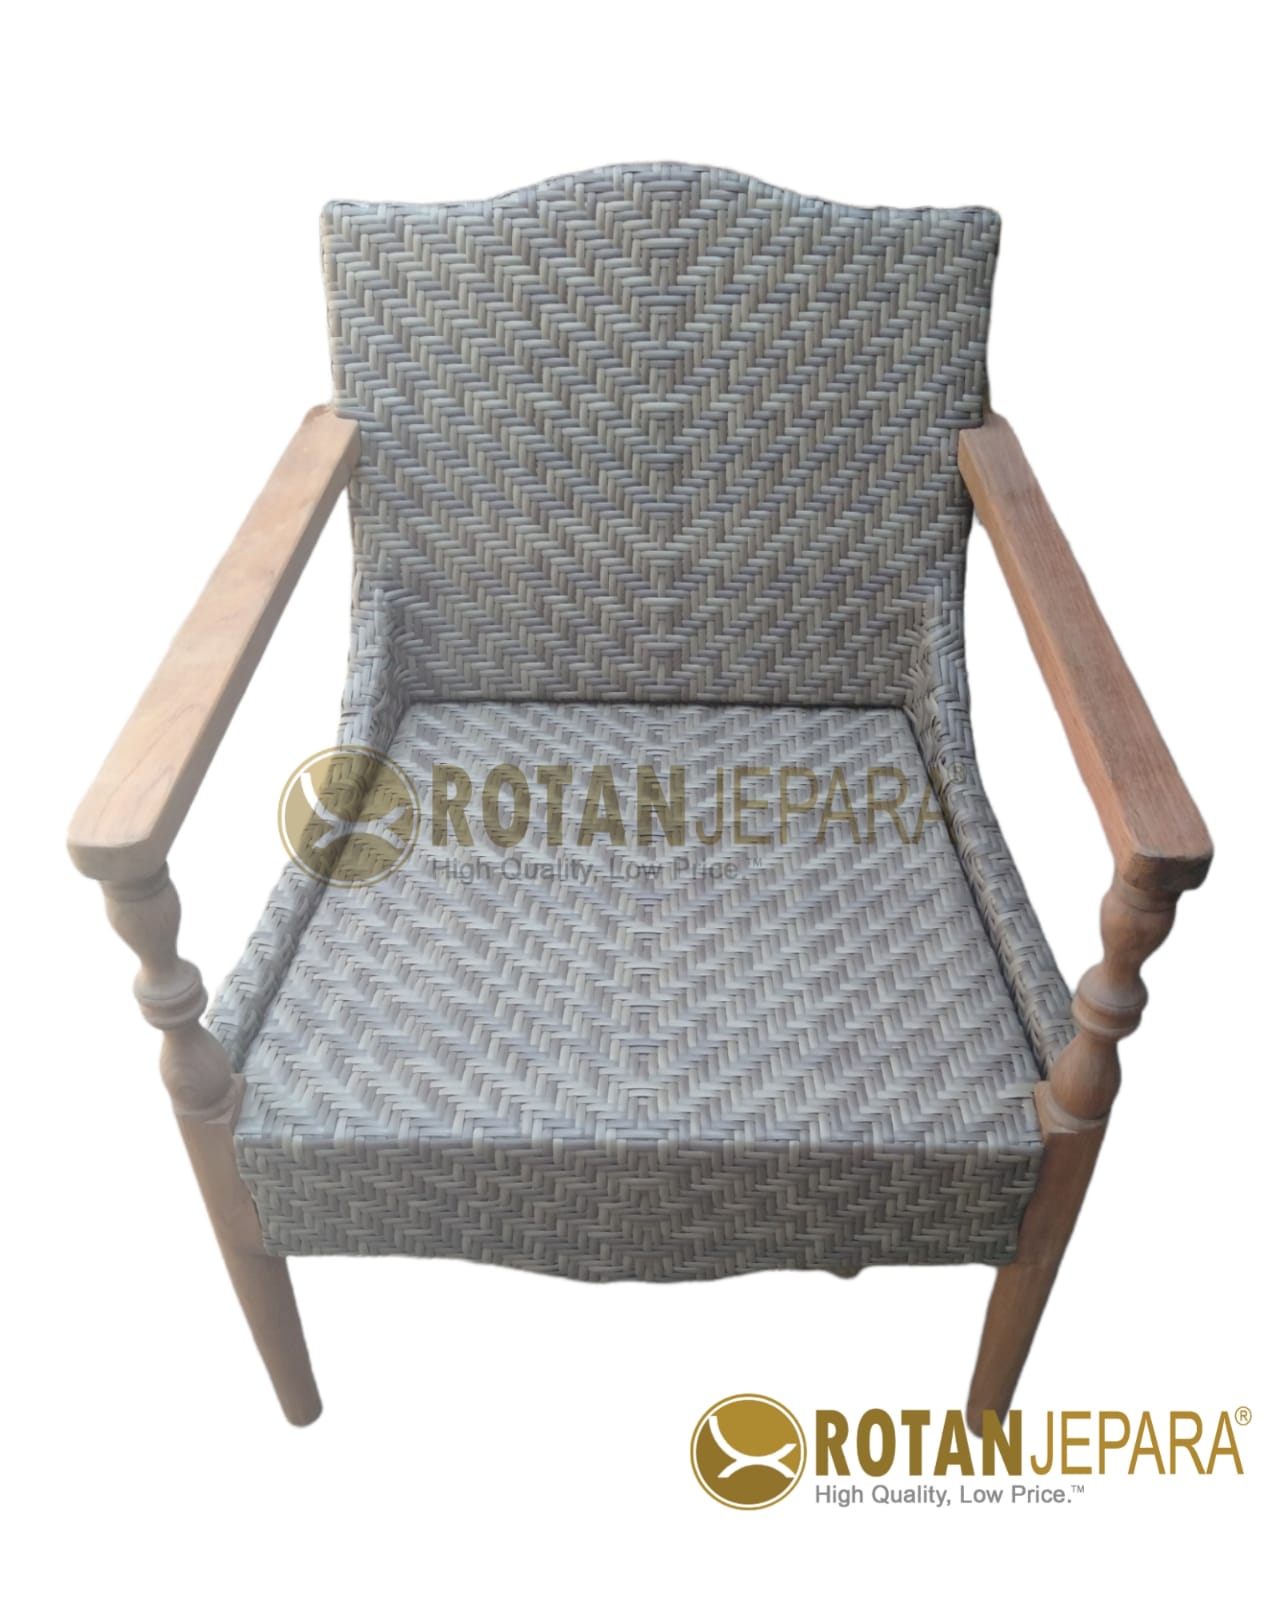 Jifbw Chat Teak Woven Arm Chair for Living Hotel Area